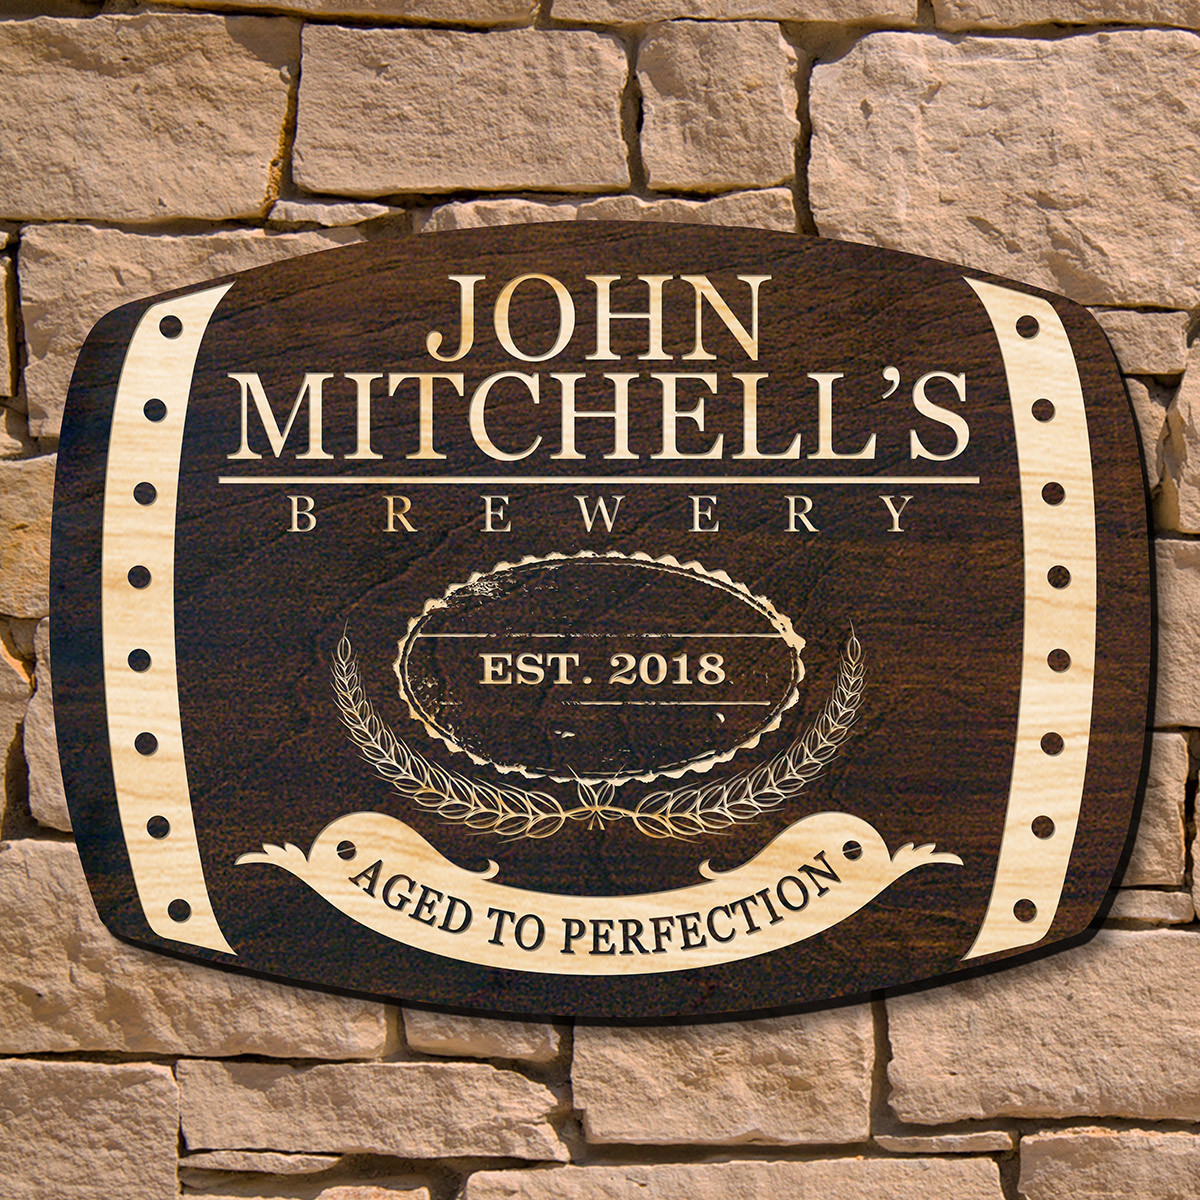 Plato once said, He was a wise man who invented beer. We wholeheartedly agree. Display your admiration for this timeless beverage with our Highland personalized whiskey bar sign. Crafted from 1/2" cut American birch wood and hand stained in a dark walnut #bar